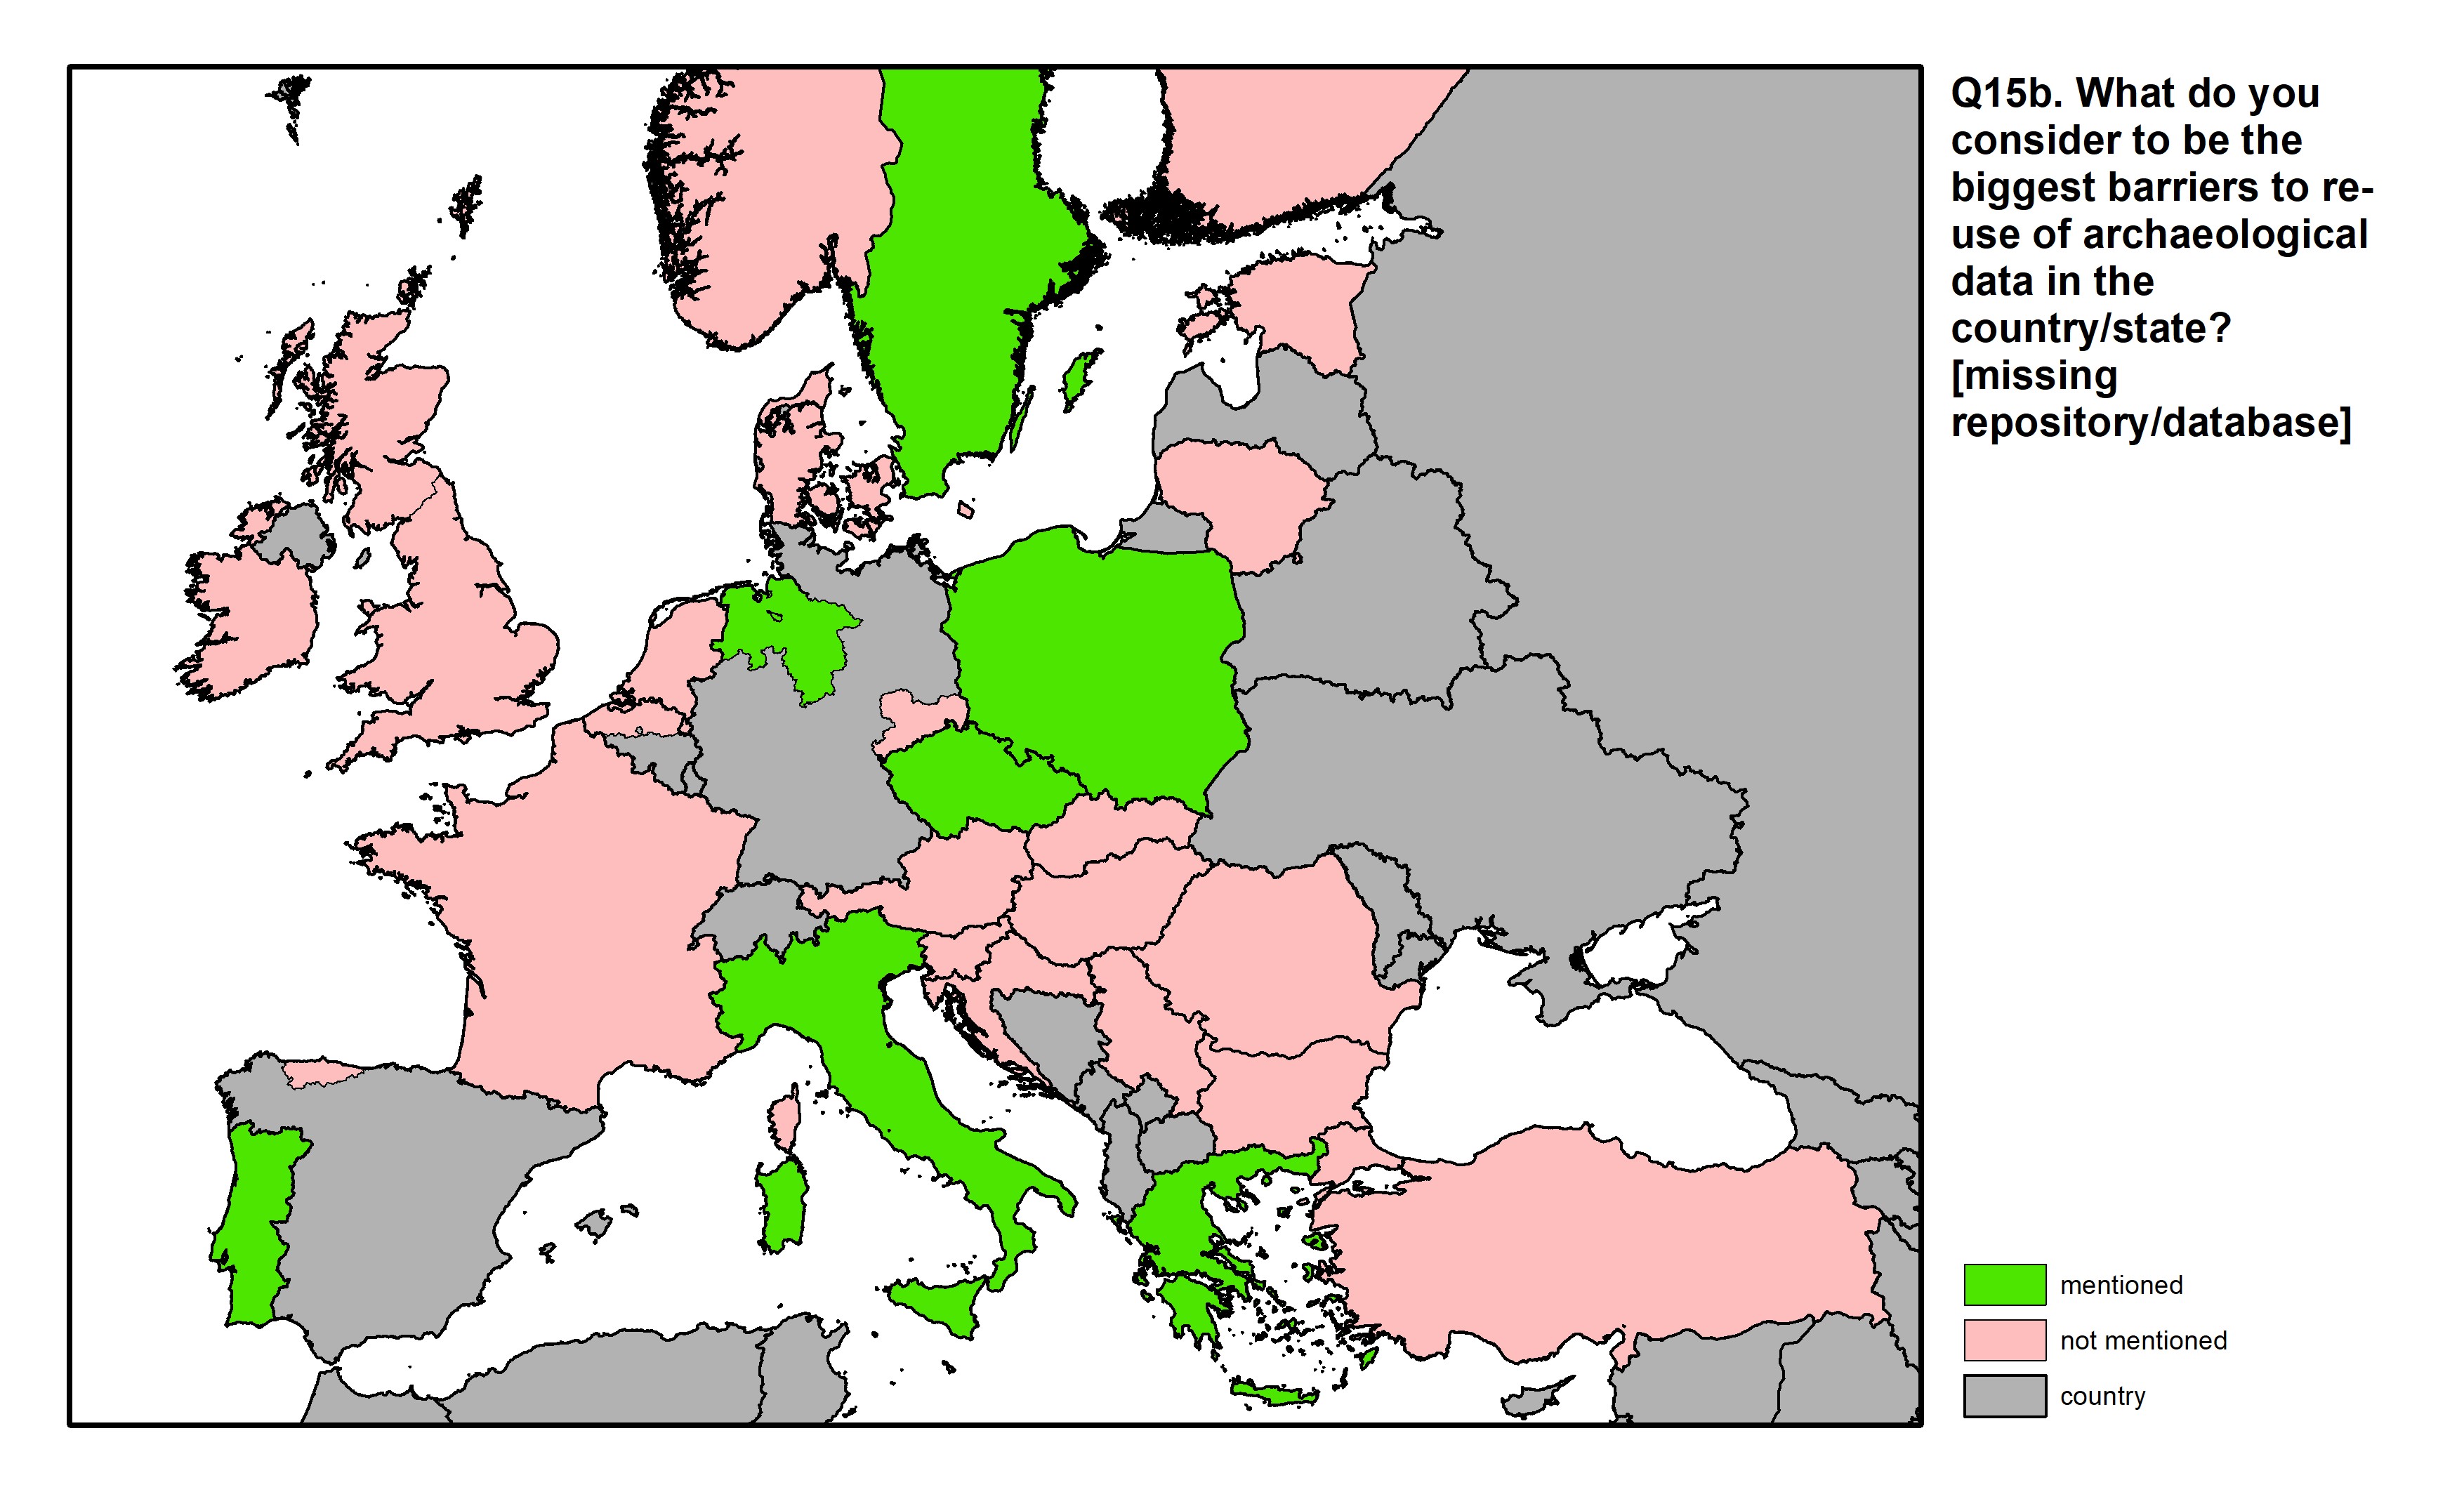 Figure 50: a map of Europe showing countries and regions in colour based on response rates to the survey question.